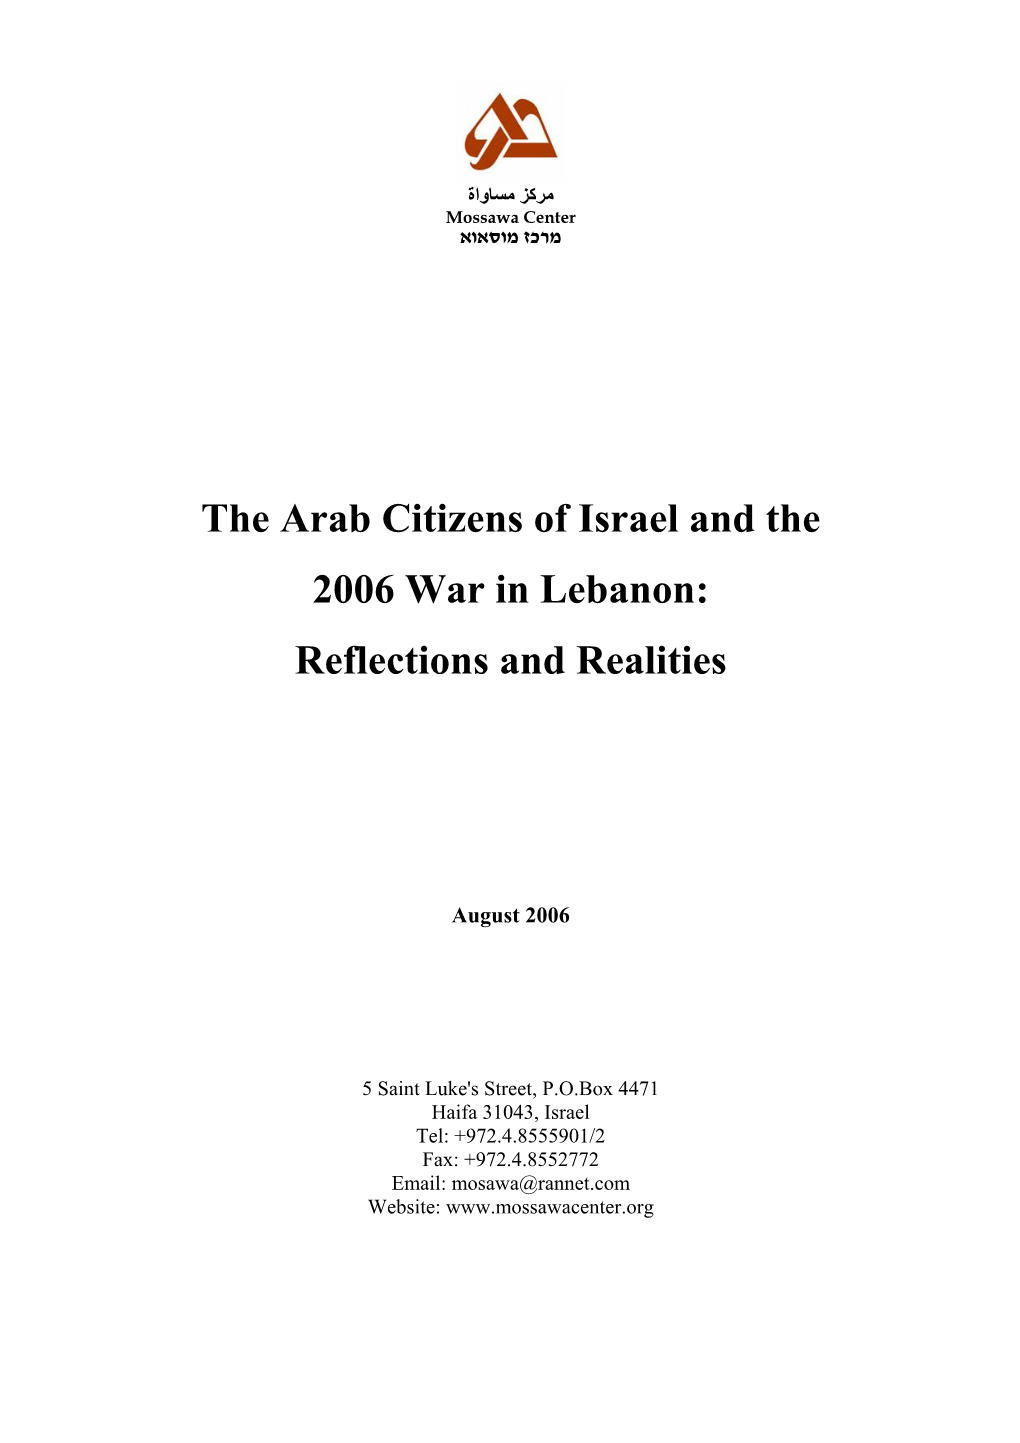 The Arab Citizens of Israel and the 2006 War in Lebanon: Reflections and Realities